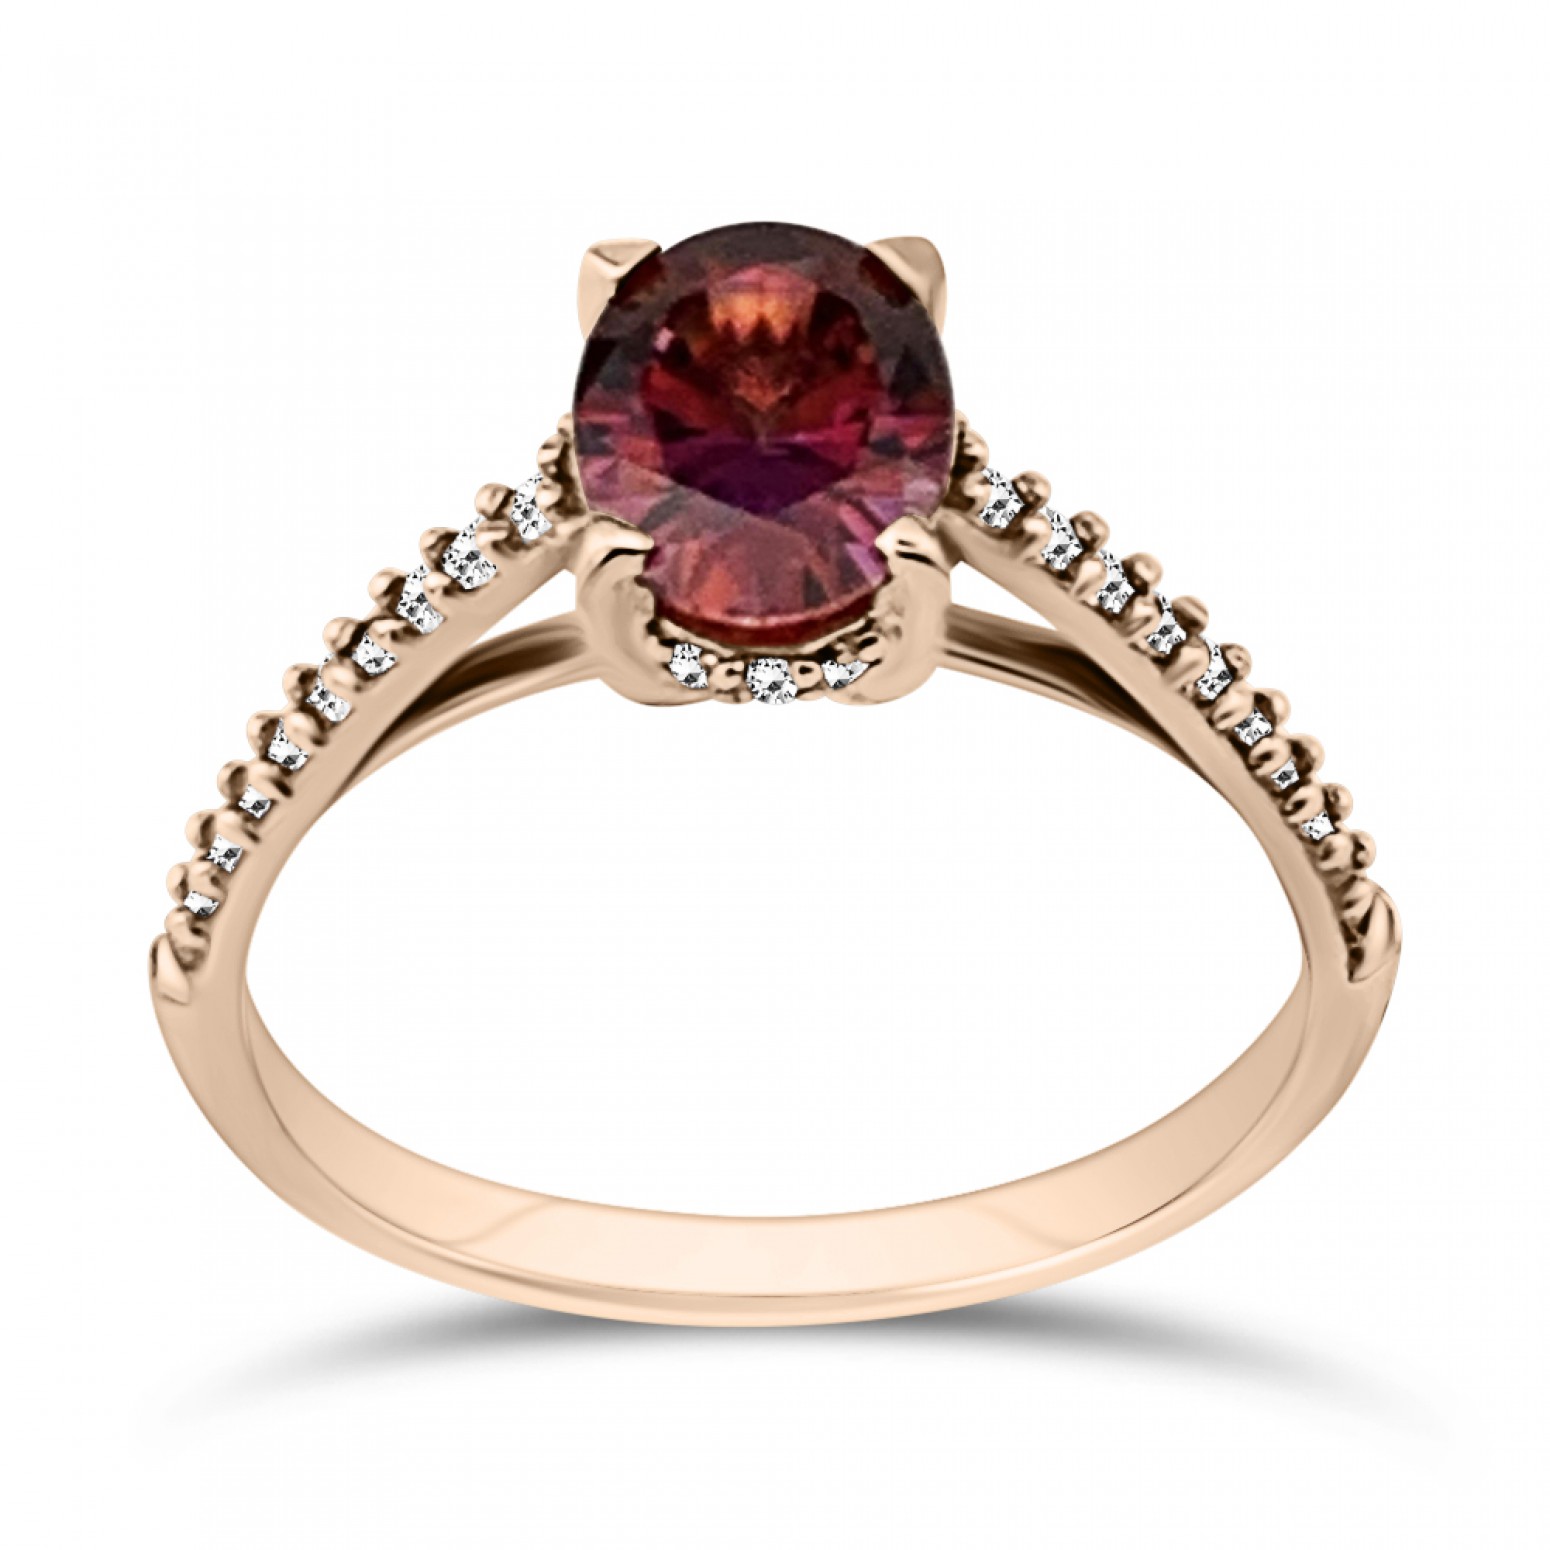 Solitaire ring 14K pink gold with red and white zircon, da3421 ENGAGEMENT RINGS Κοσμηματα - chrilia.gr